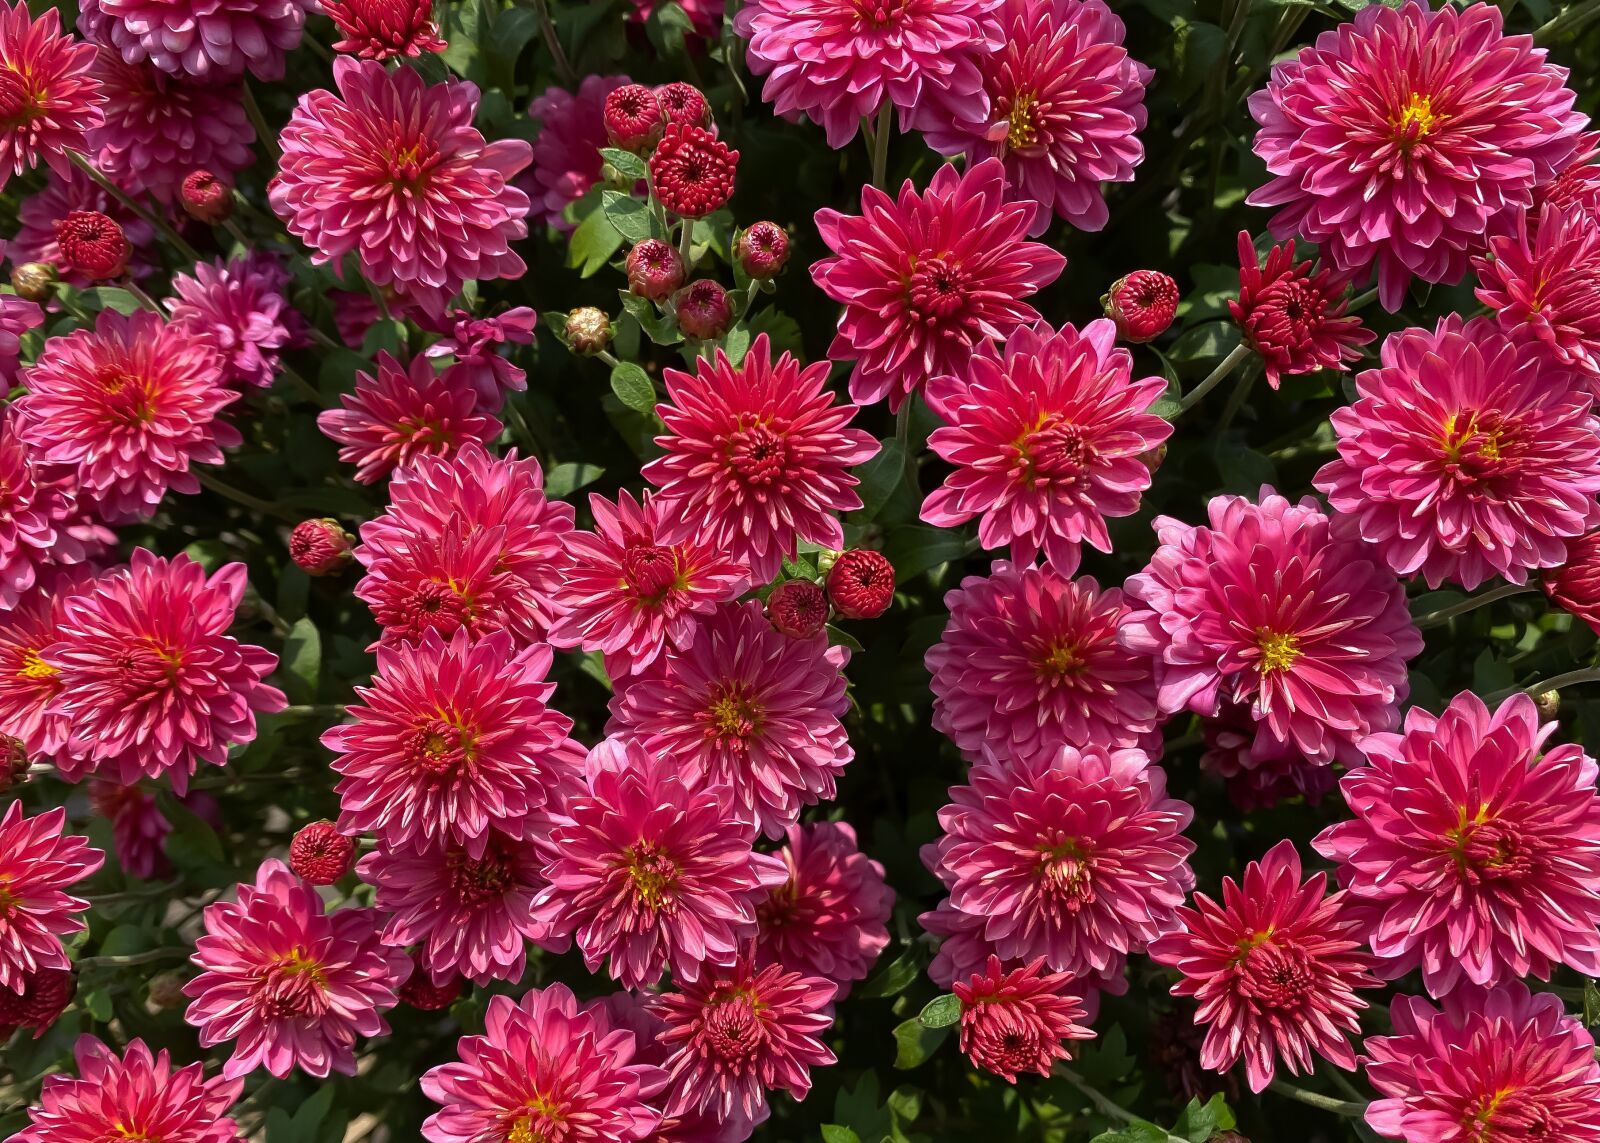 Apple iPhone 11 Pro + iPhone 11 Pro back triple camera 4.25mm f/1.8 sample photo. Mums, flowers, fall photography